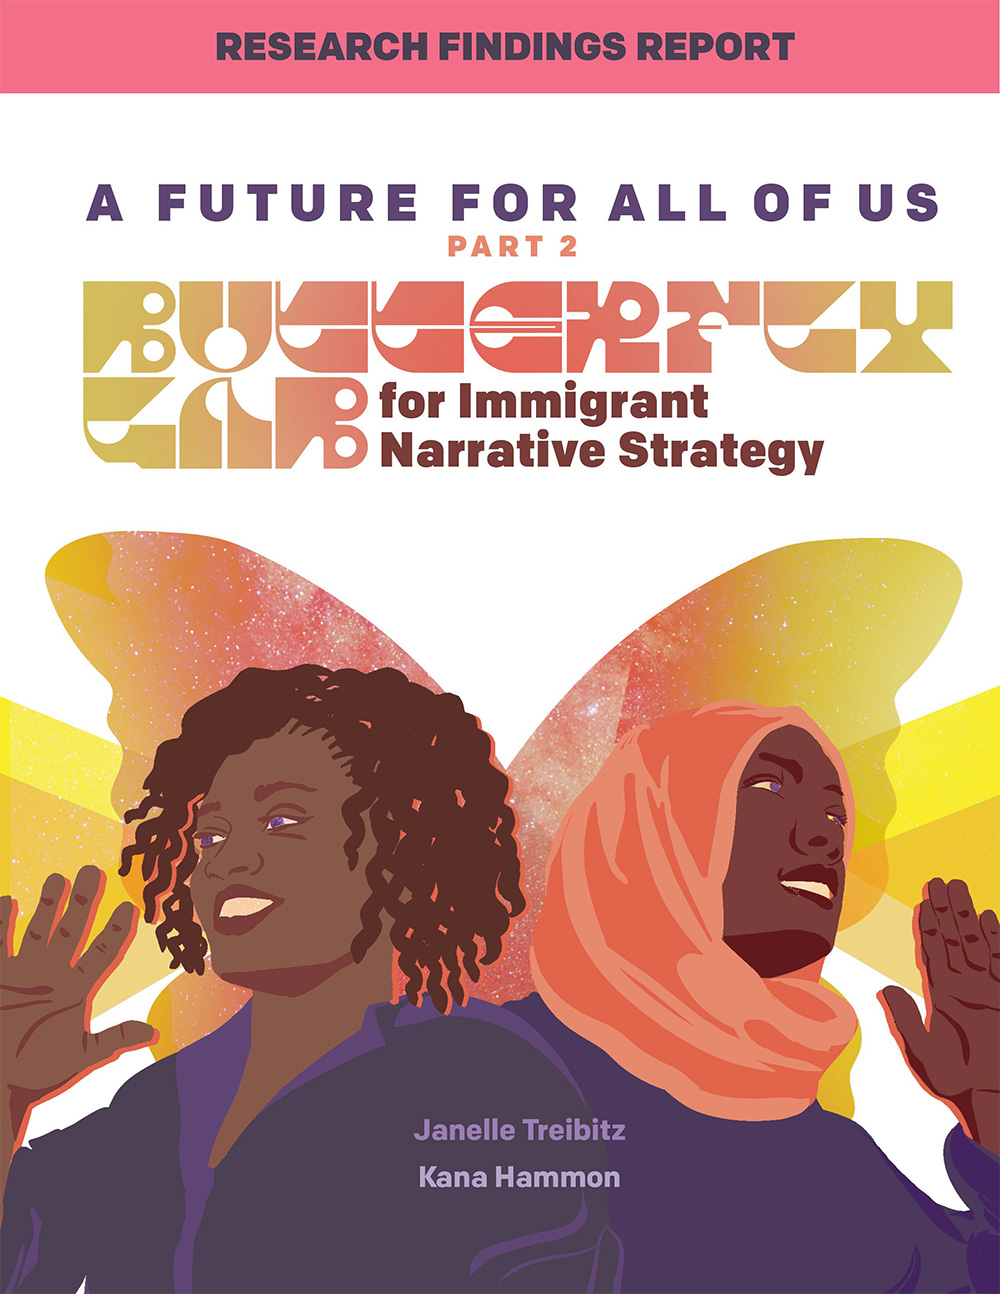 Cover for A Future for All of Us Part 2, Butterflylab for Immigrant Narratives Research Findings Report. Drawing of two people waving in front of abstract butterfly wings.